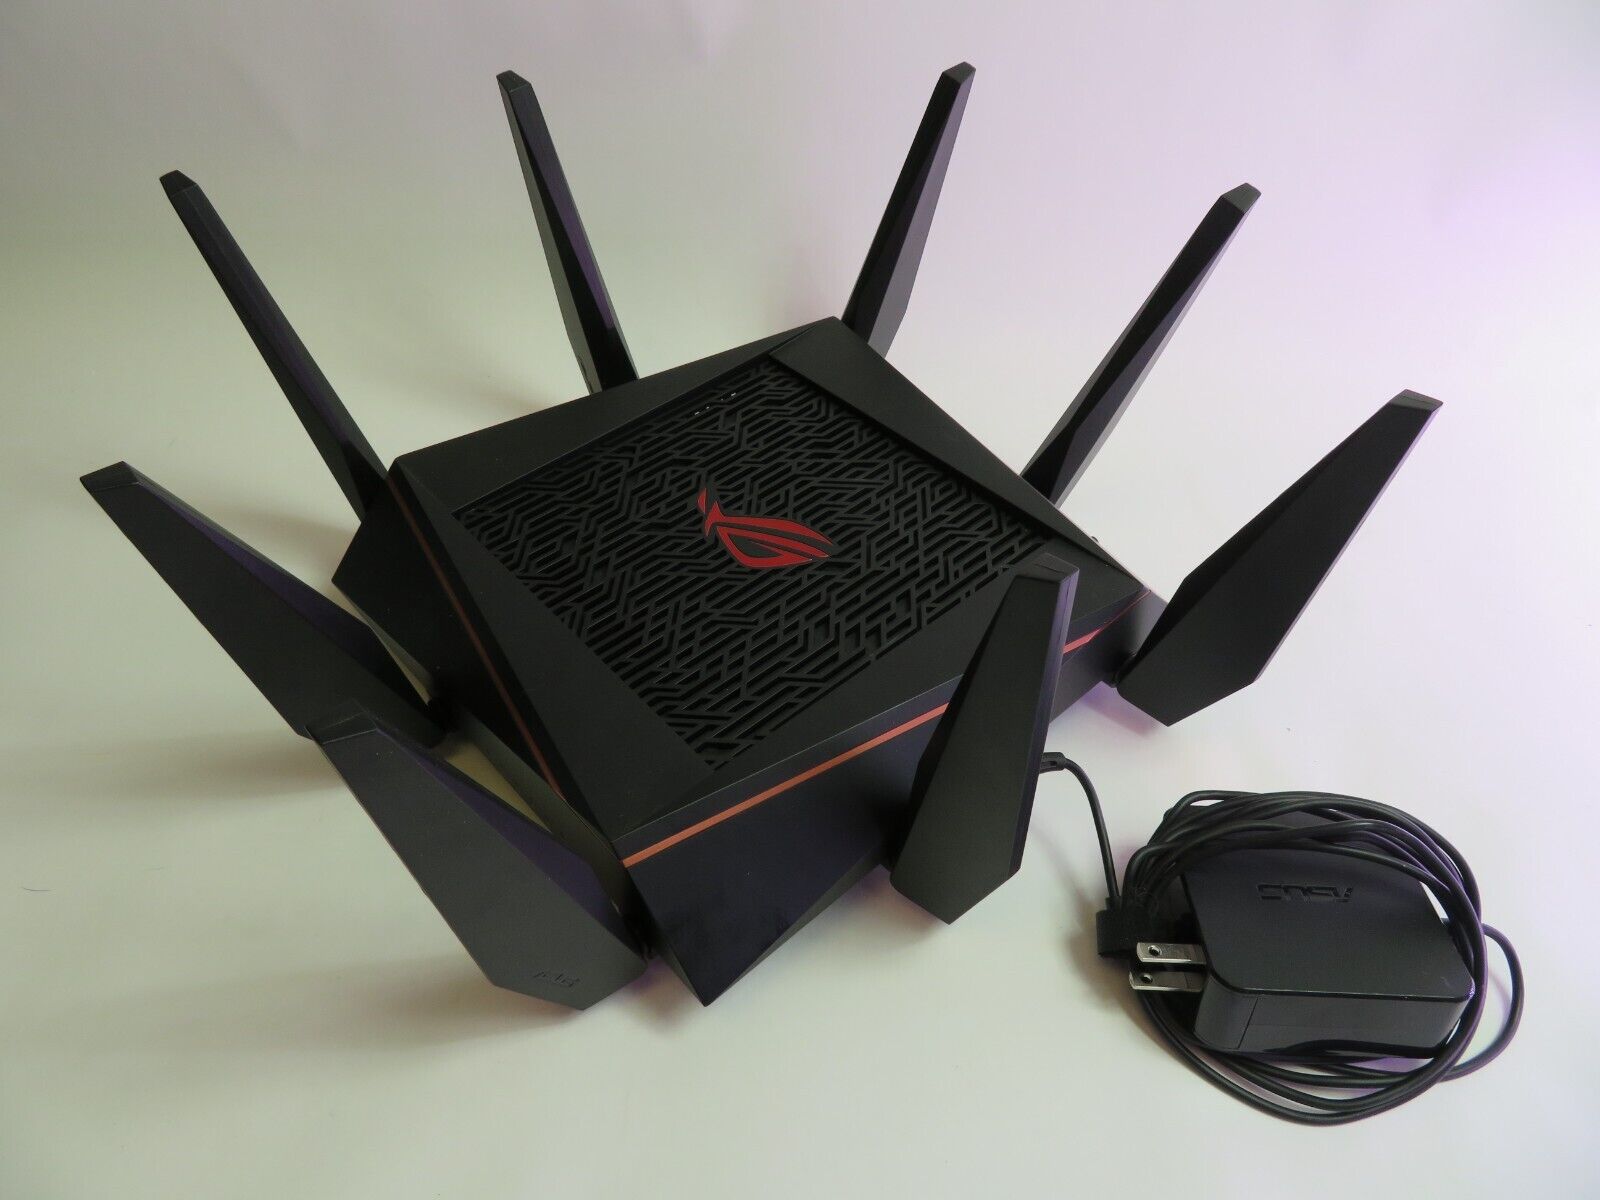 ASUS RAPTURE TRI-BAND WIRELESS GAMING ROUTER, GT-AC5300, 8-PORT, 2G/5G/5G GAMING